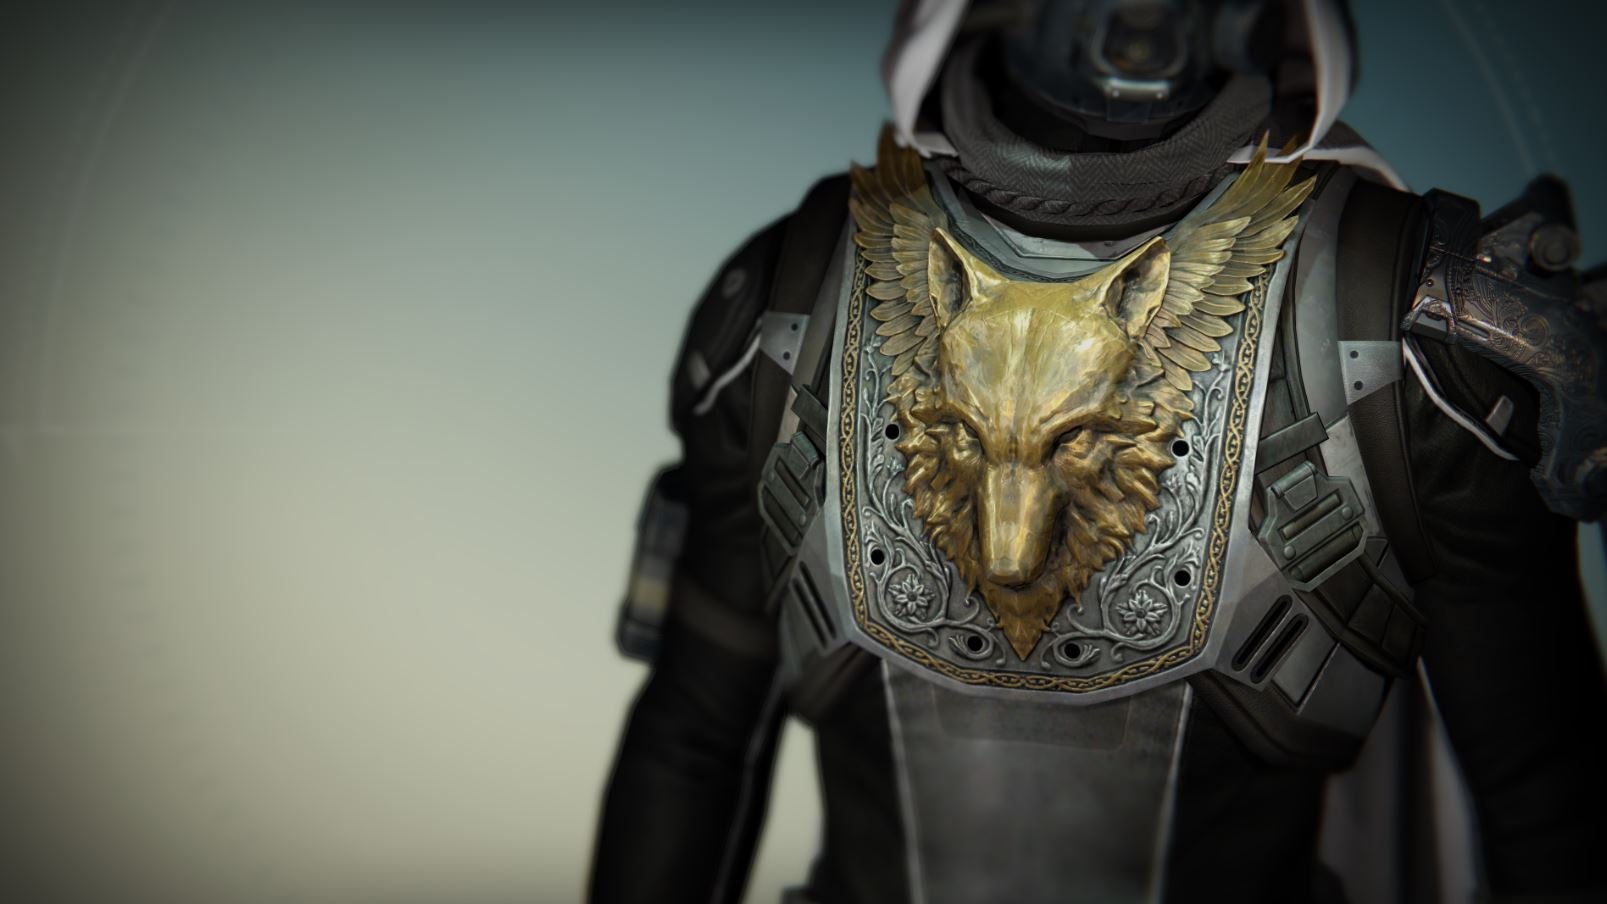 I Played 45 Minutes Of Destiny, And It Was Kind Of Boring